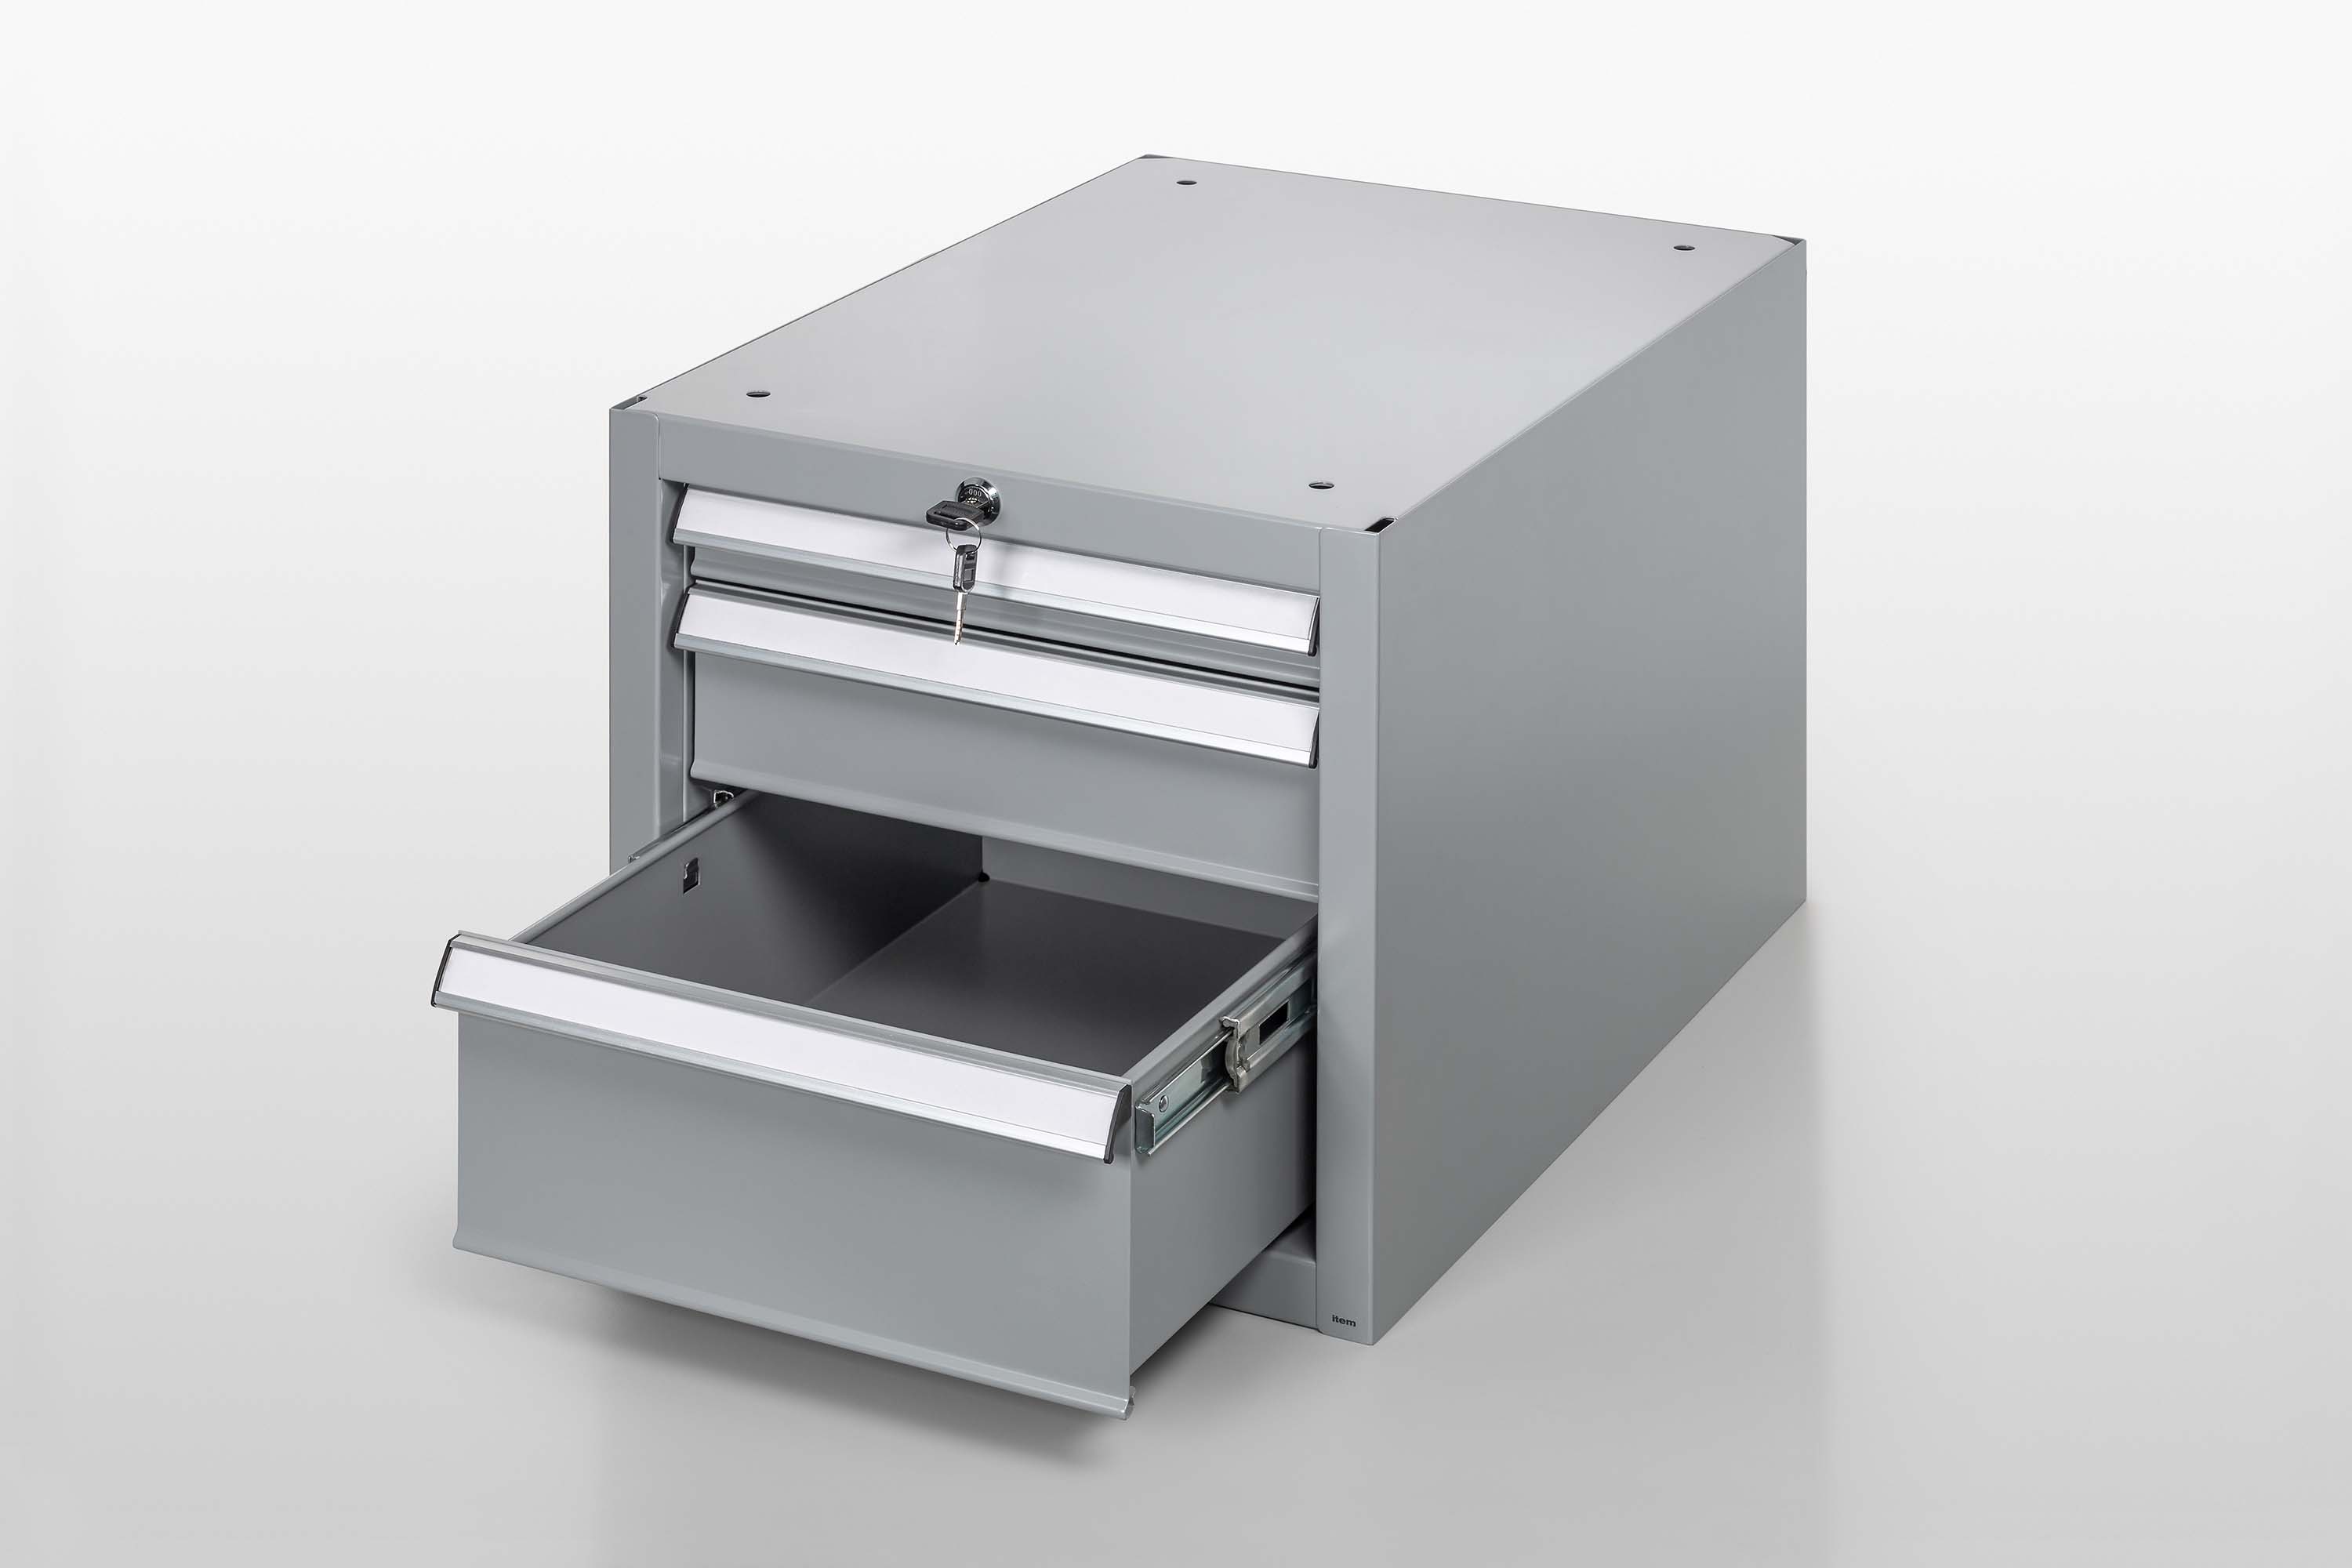 Drawer Unit S3 E, grey similar to RAL 7042